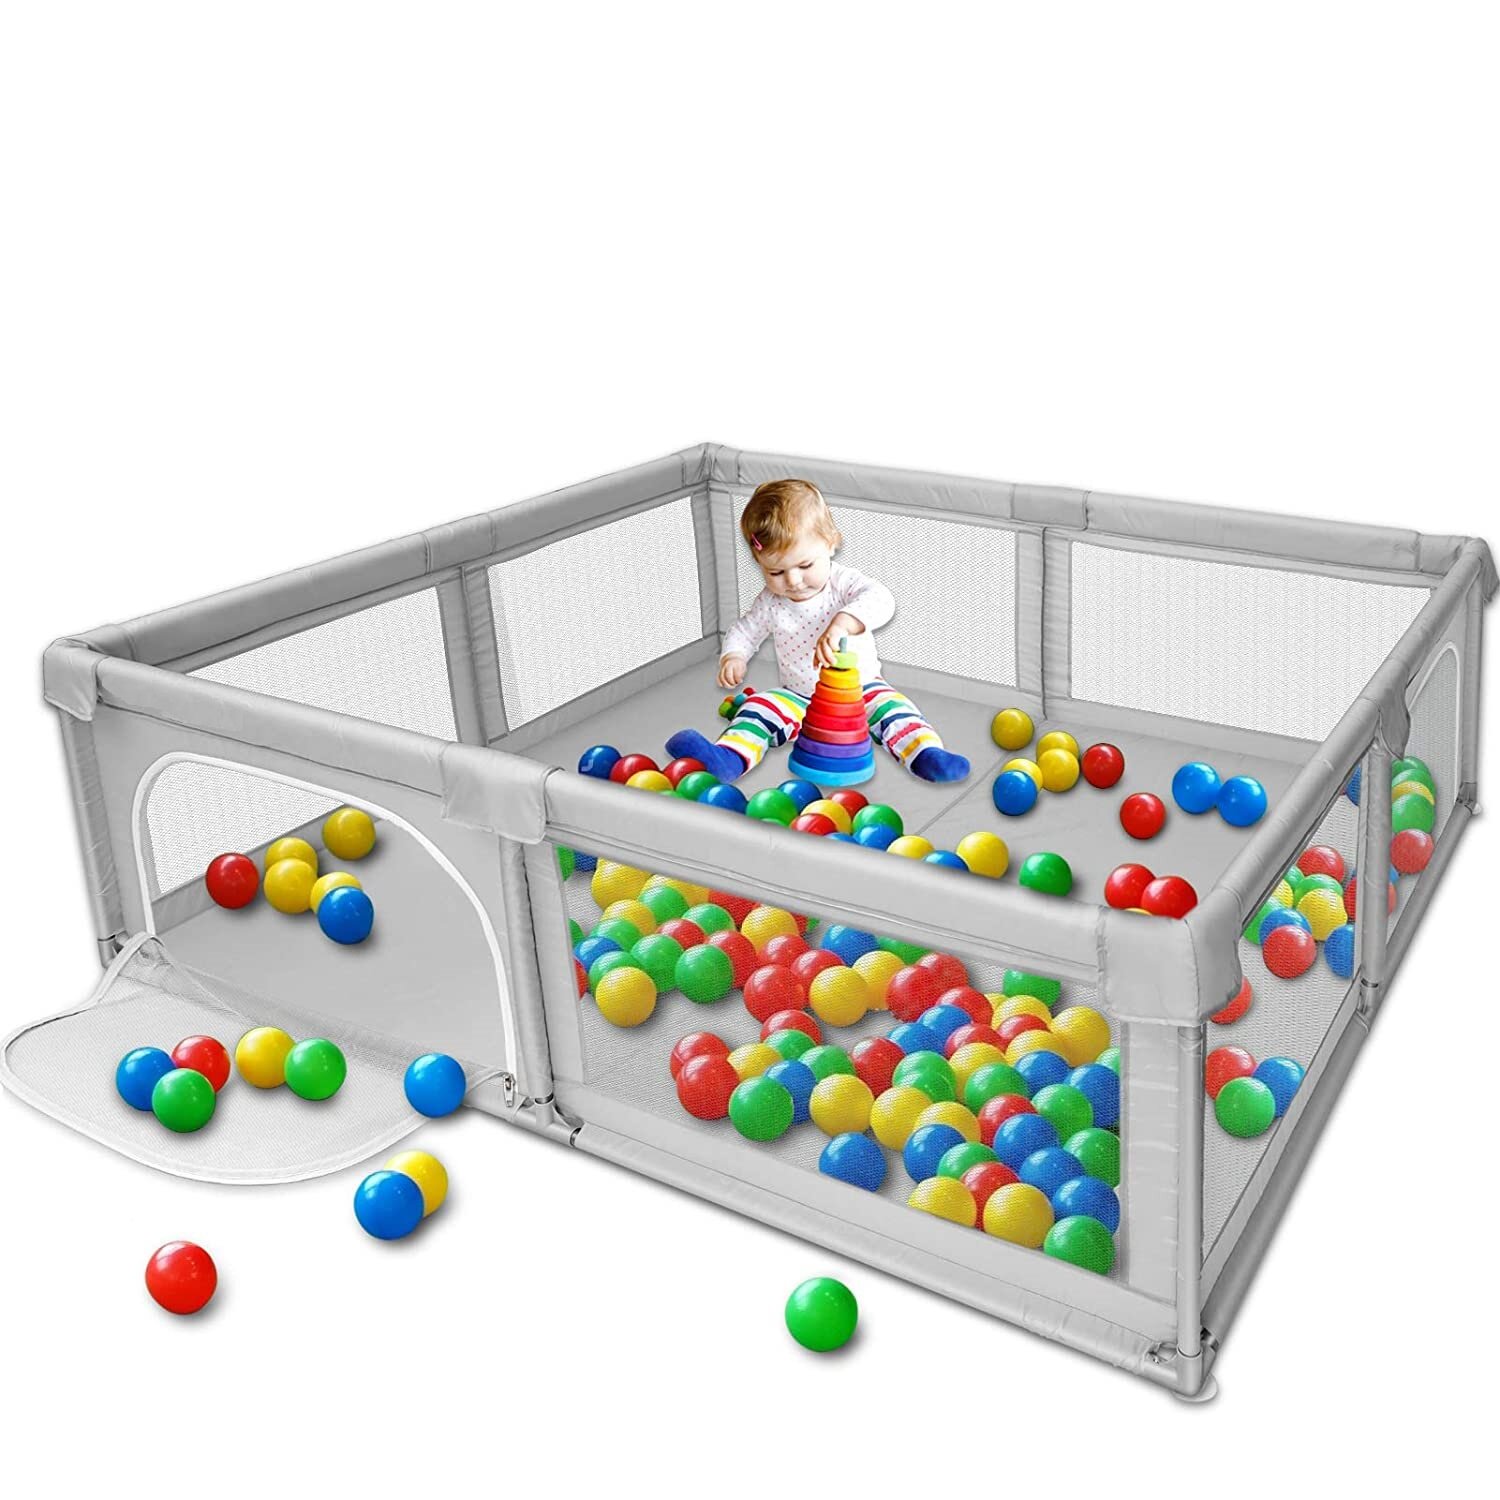 best price,79inch,baby,playpen,infants,toddler,safety,kids,play,yard,eu,coupon,price,discount